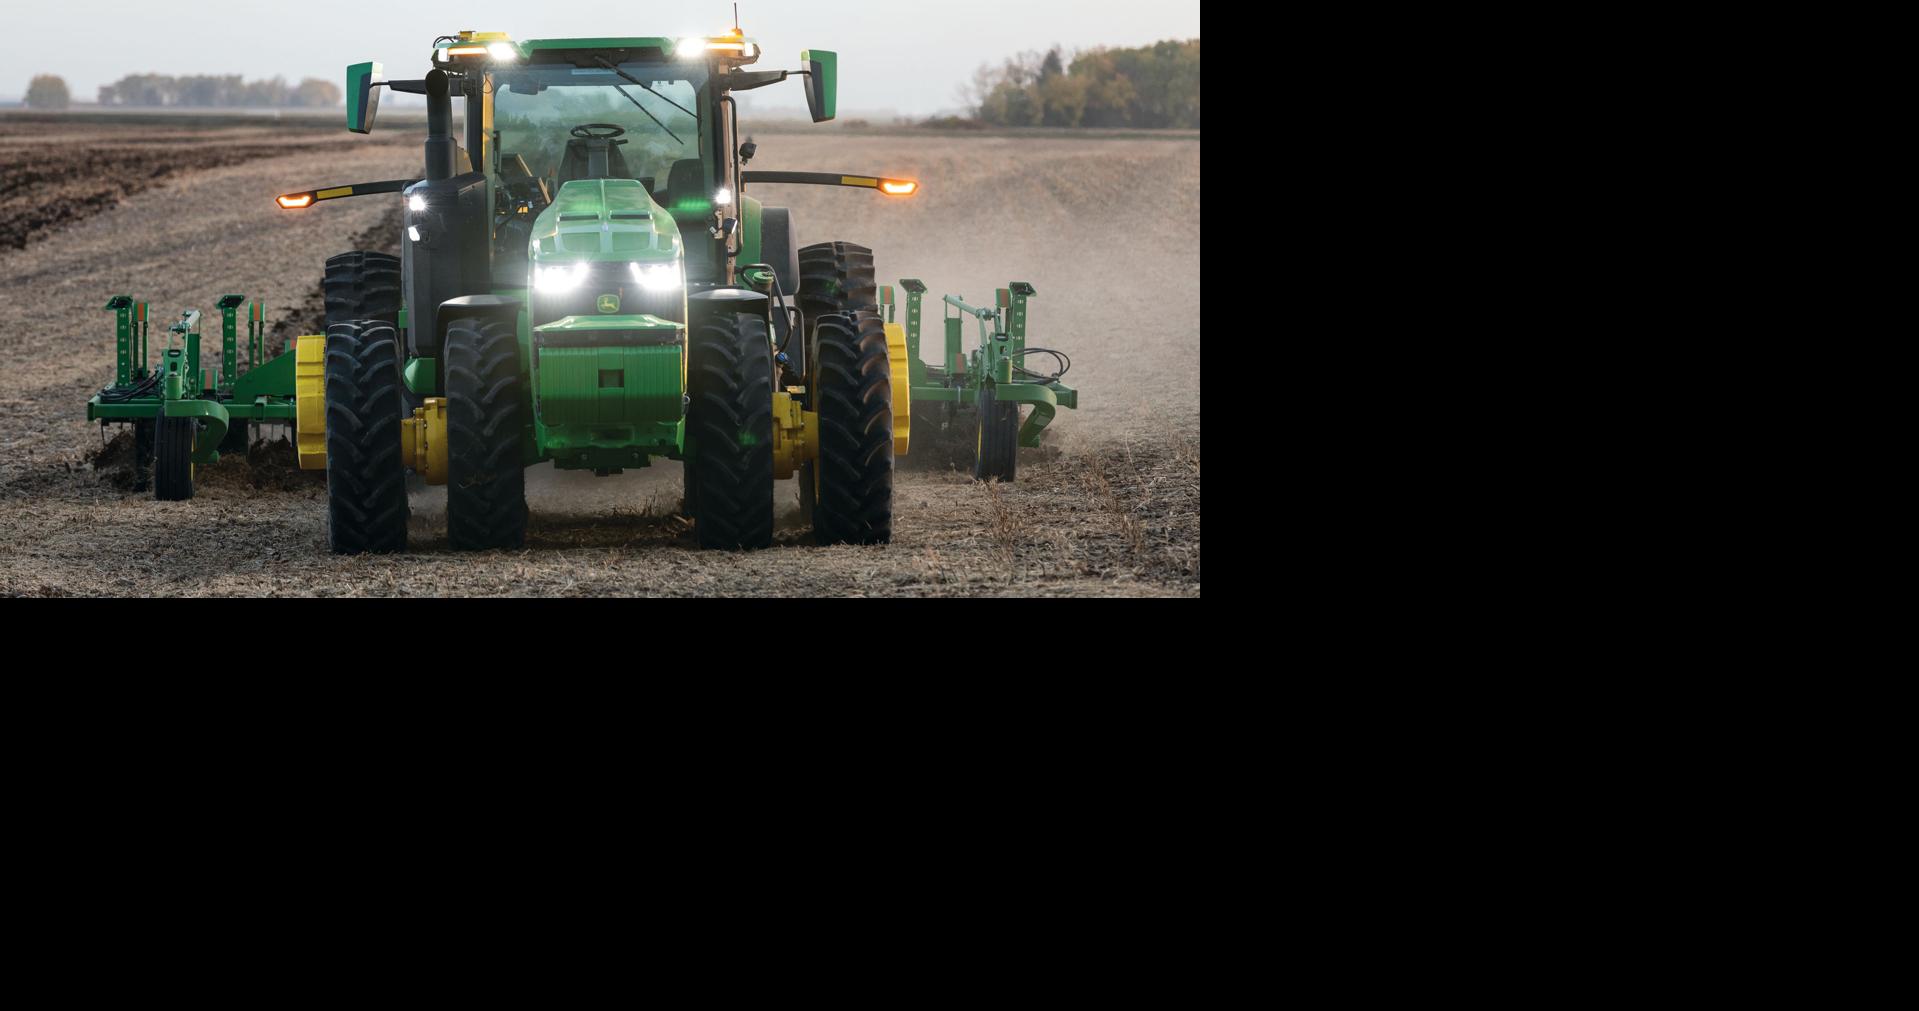 Deere discusses future technology, sustainability advances in annual shareholder meeting | Business & Economy